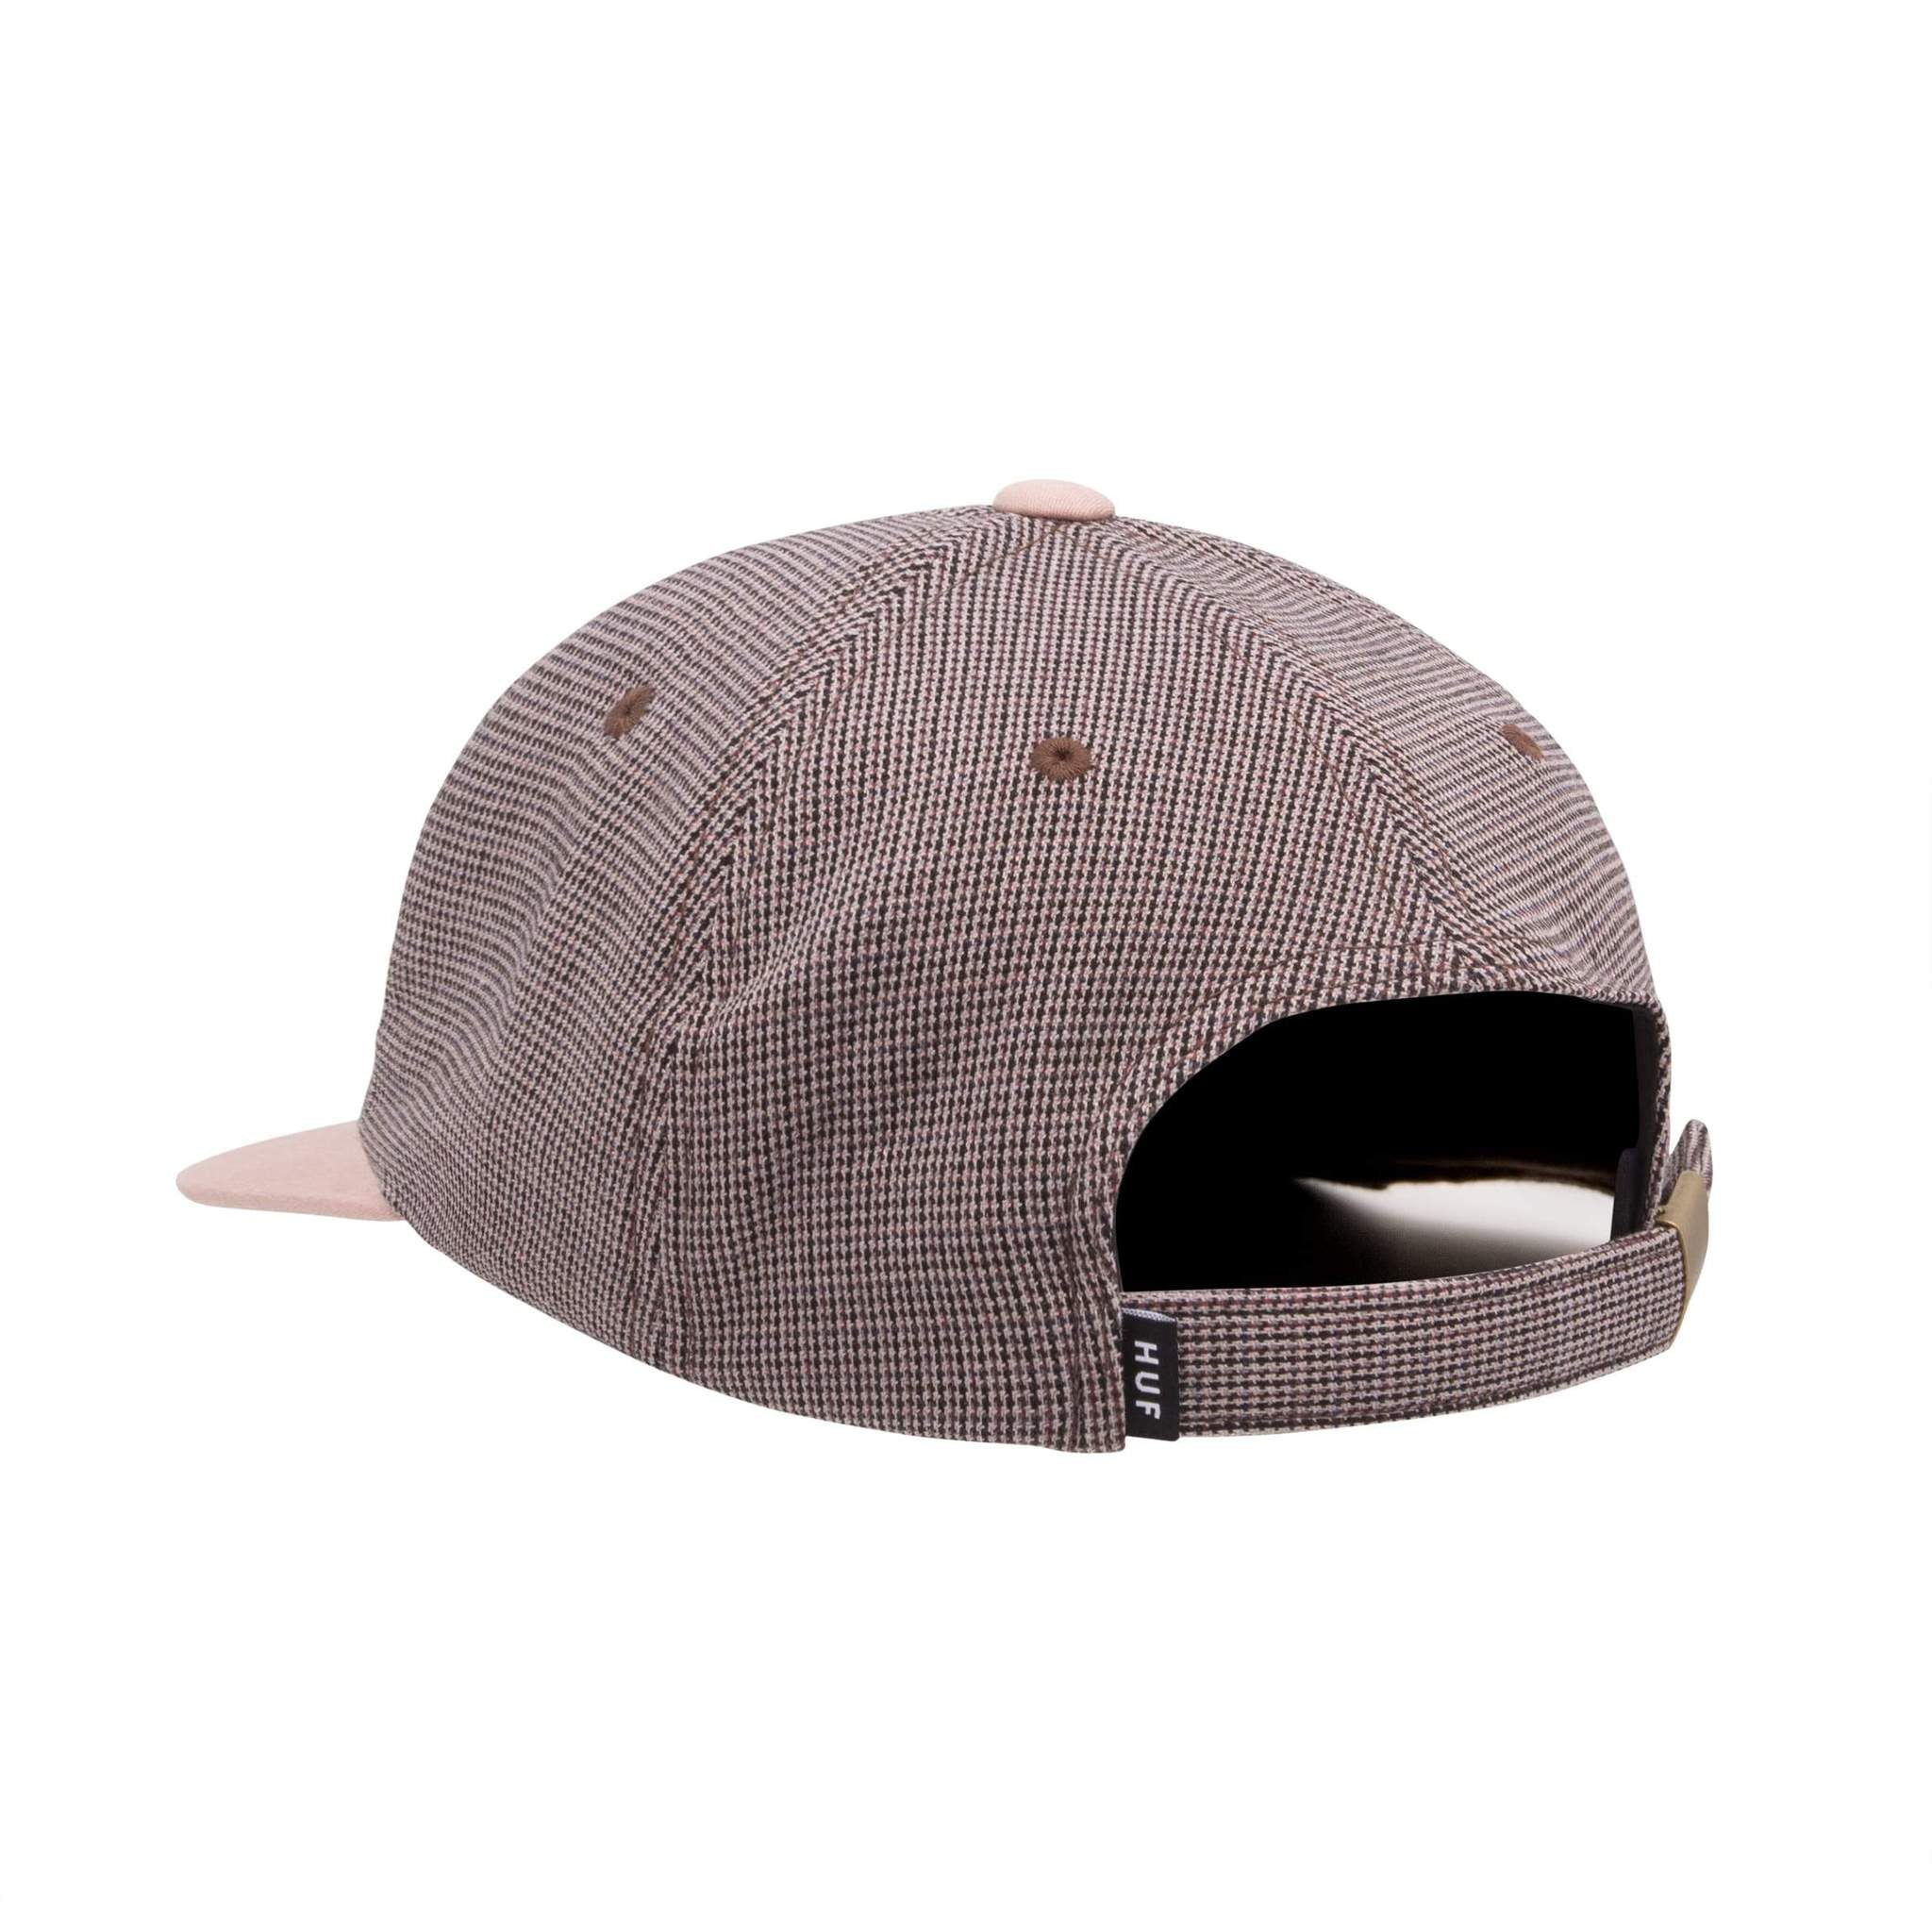 HUF - Micro Houndstooth 6 Panel Hat